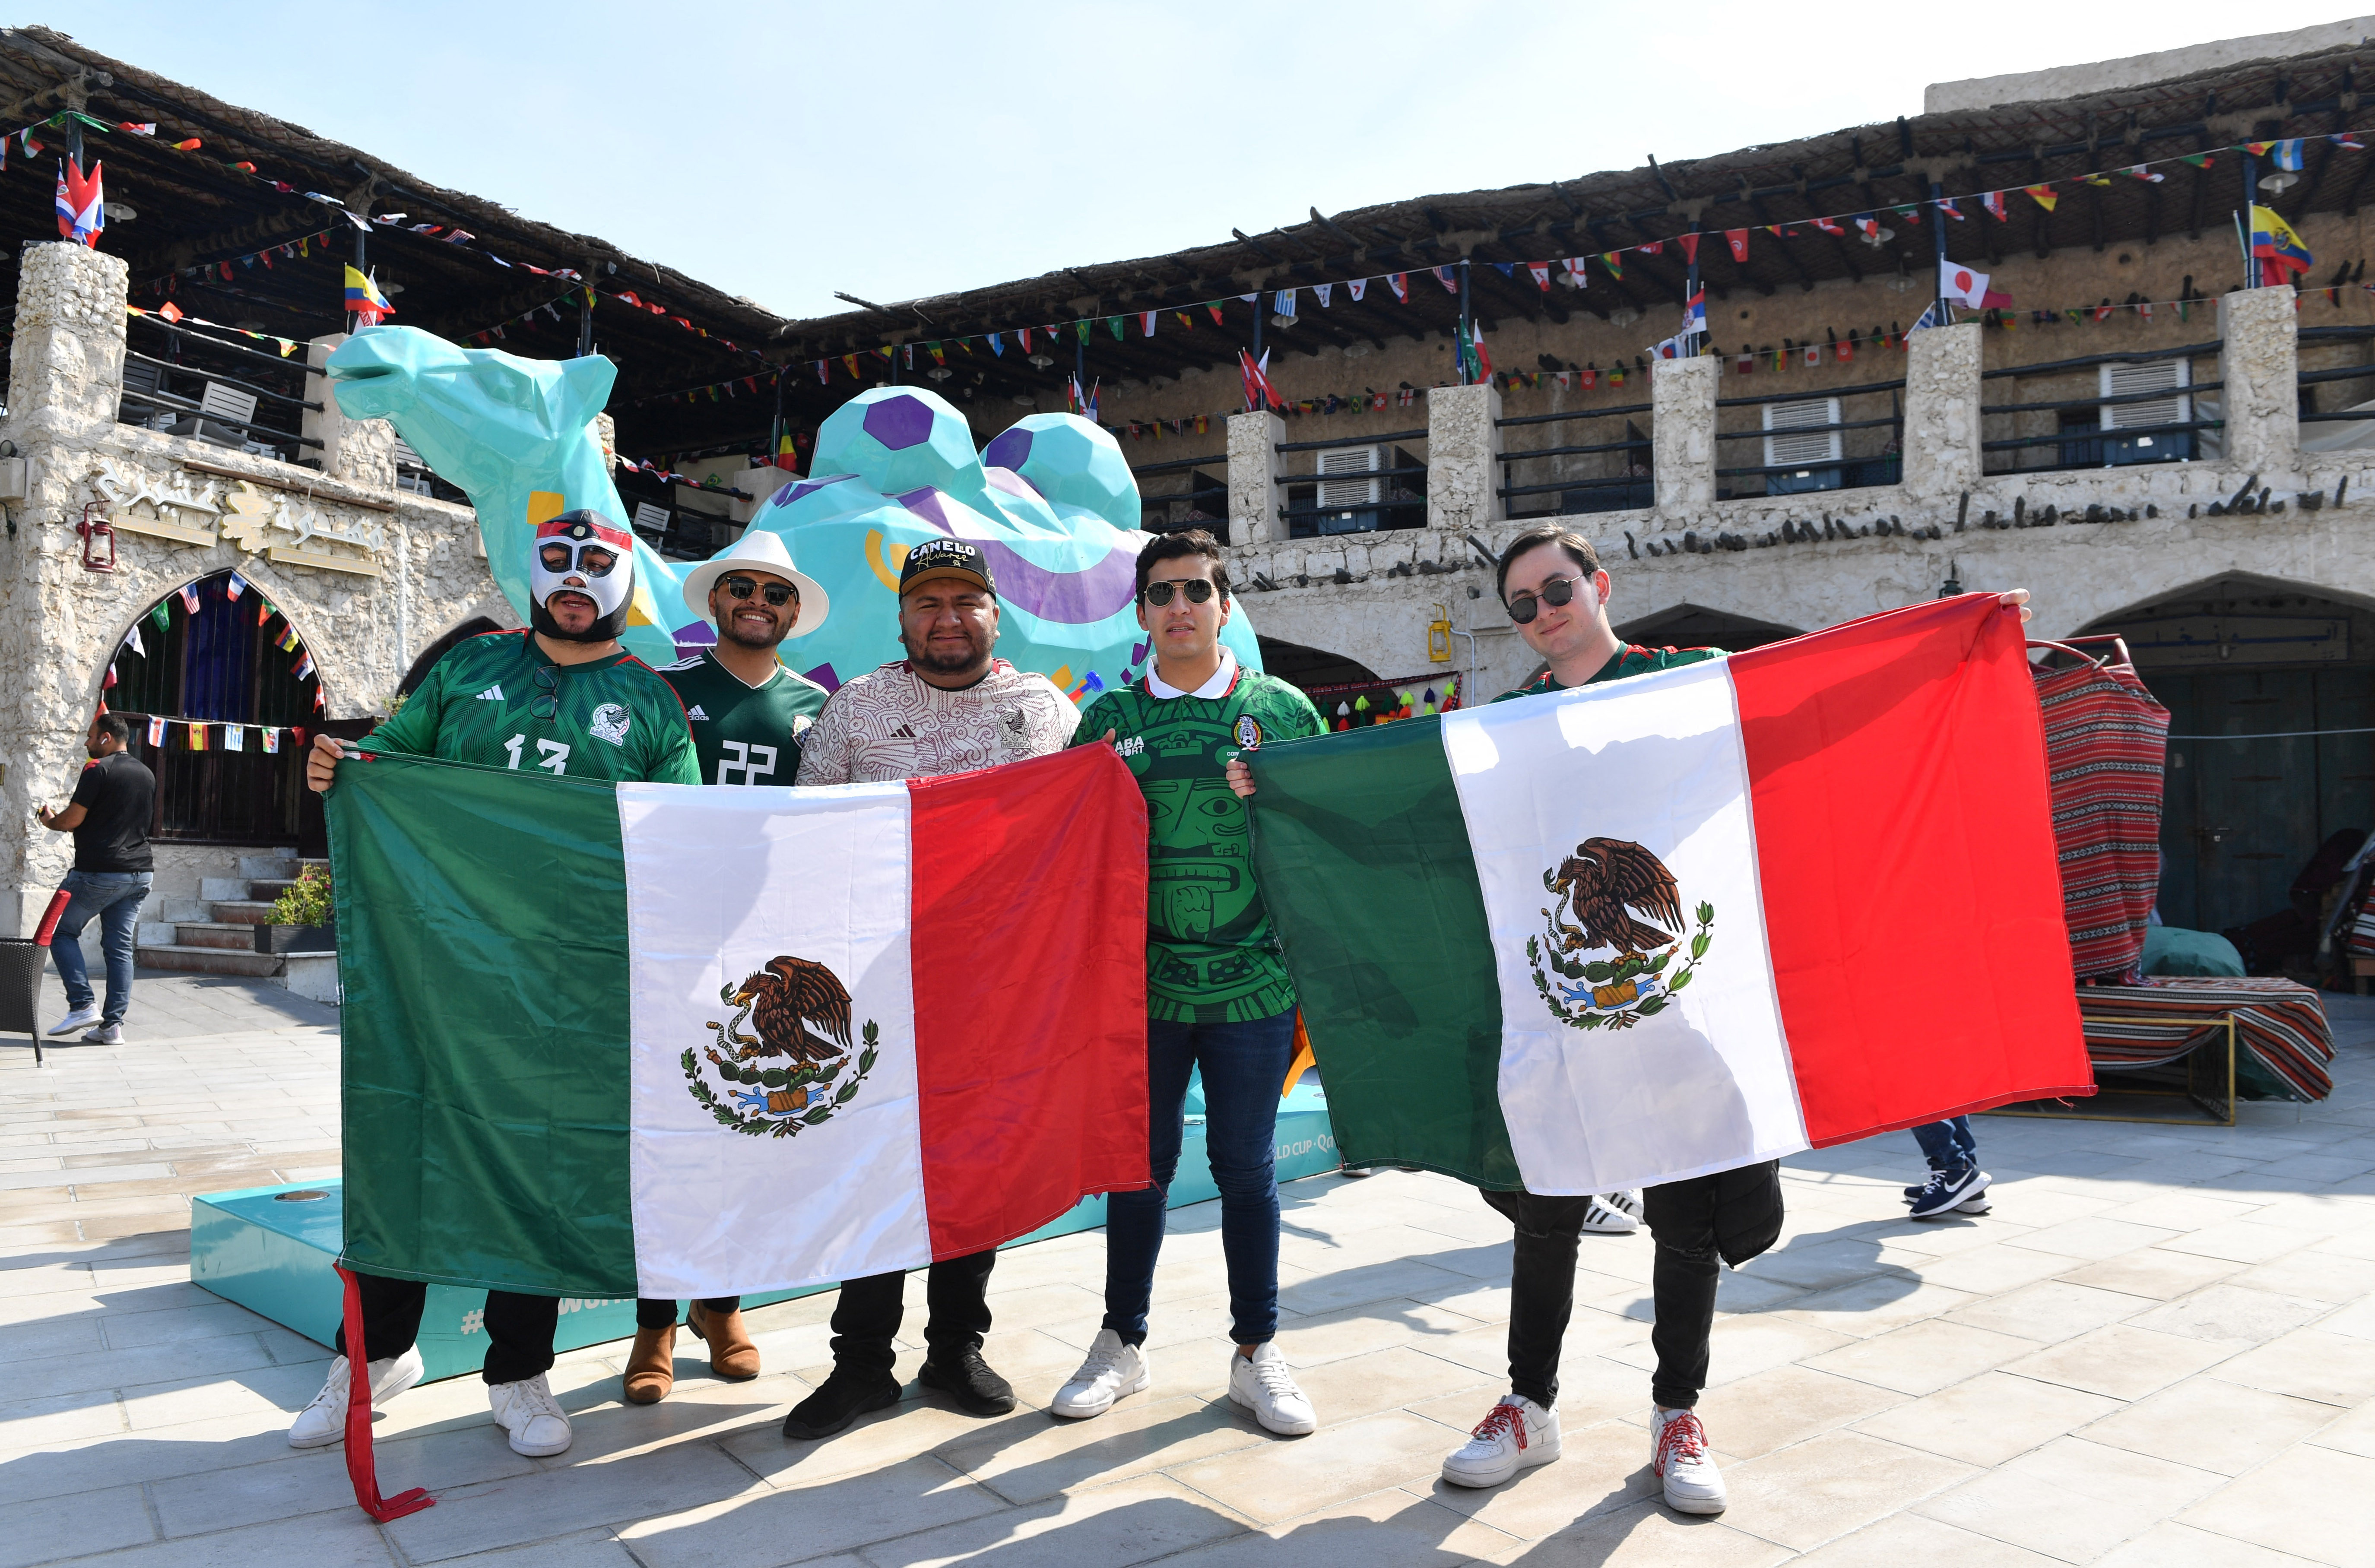 Soccer Football - FIFA World Cup Qatar 2022 - Doha, Qatar - November 22, 2022 Mexico fans pose with their flag at the Souq ahead of the match between Argentina and Saudi Arabia REUTERS/Jennifer Lorenzini